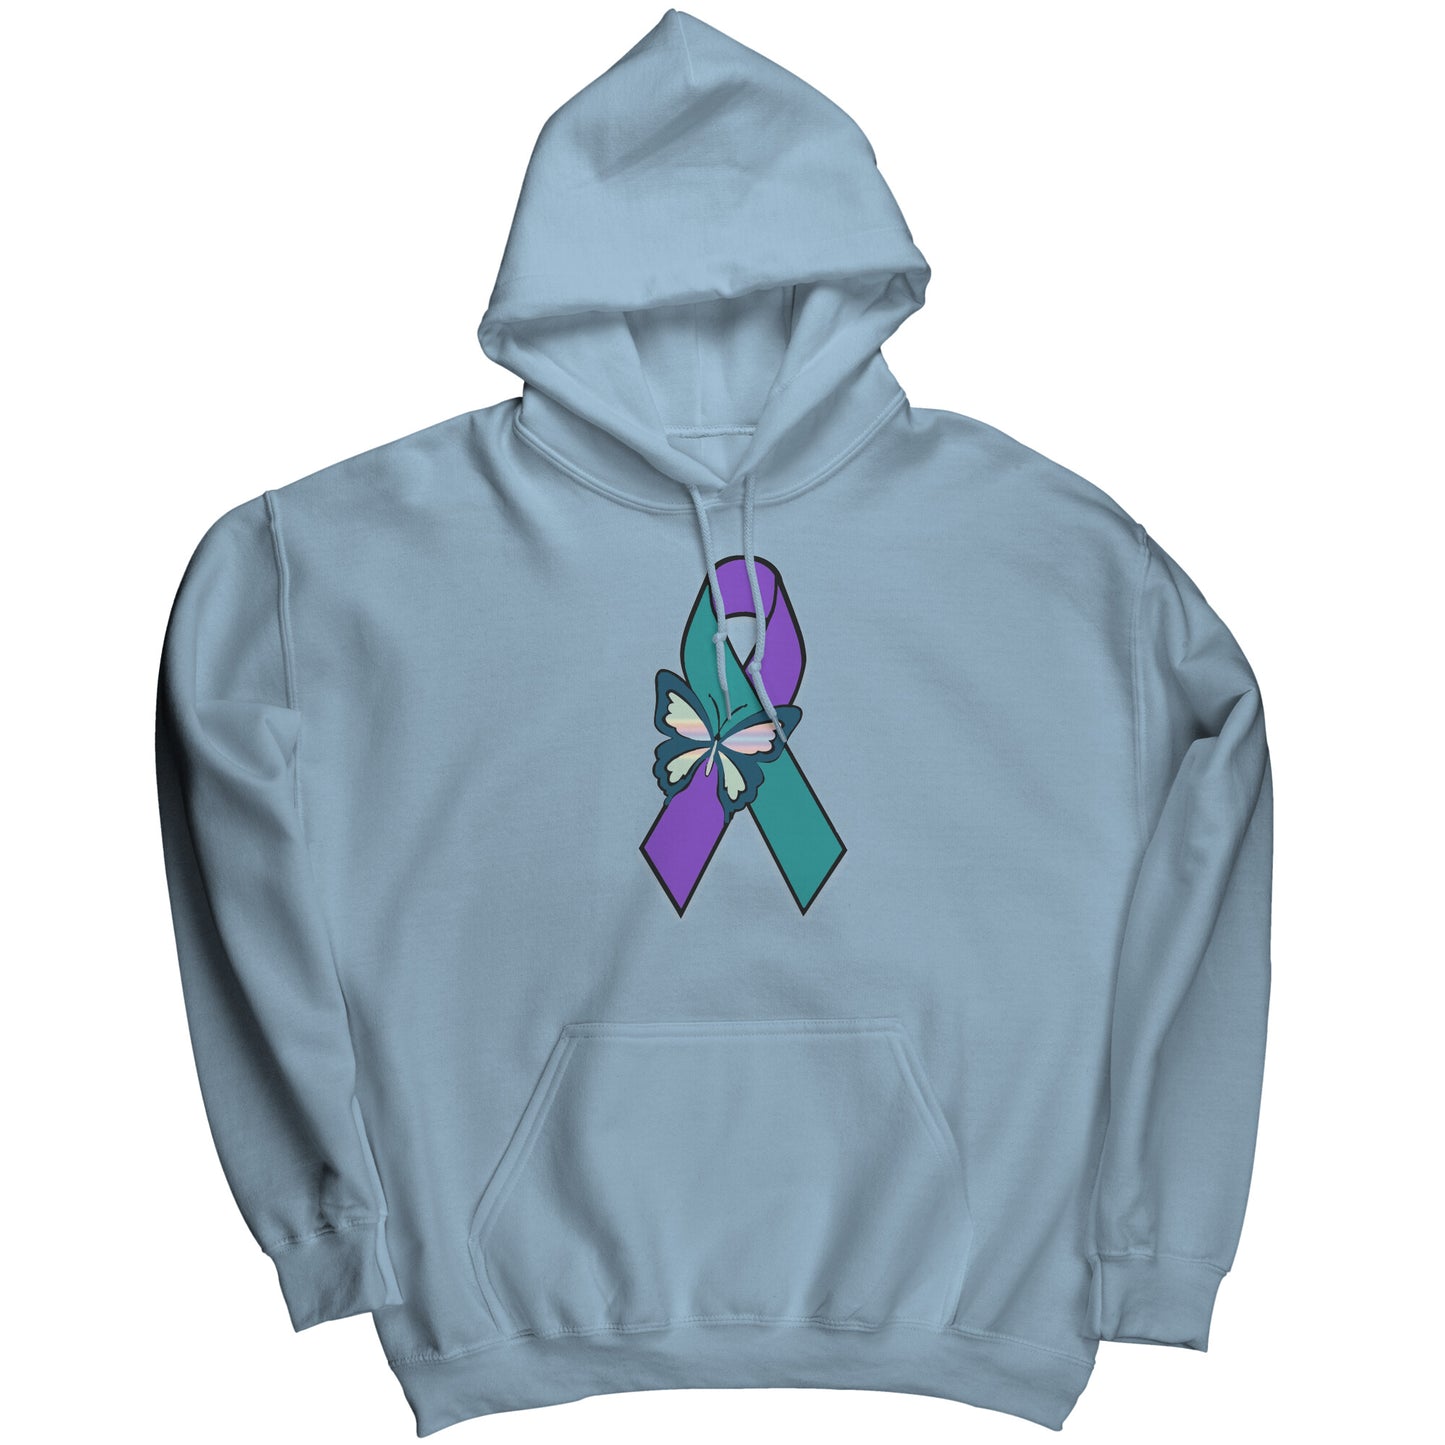 Suicide Awareness Butterfly Ribbon Hoodie